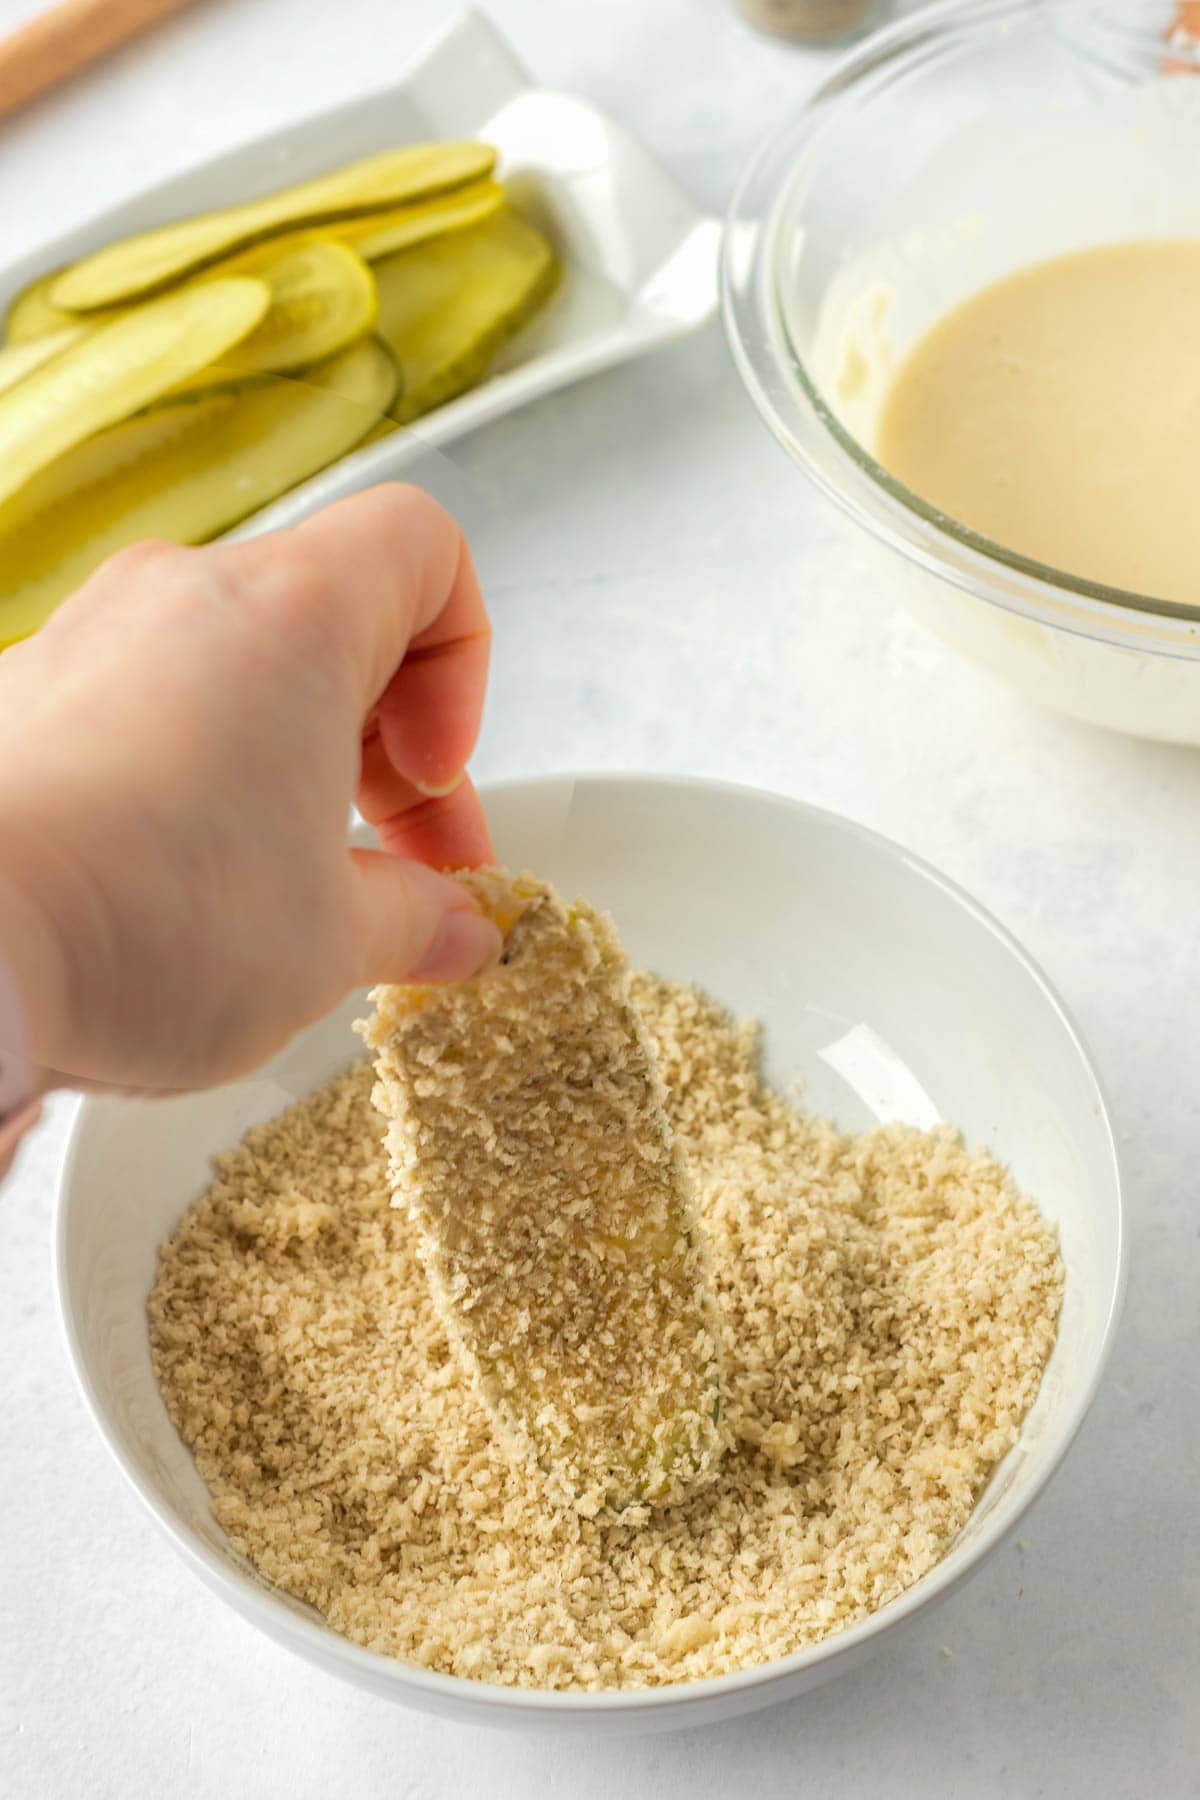 Dipping the pickle in the bread crumb mixture